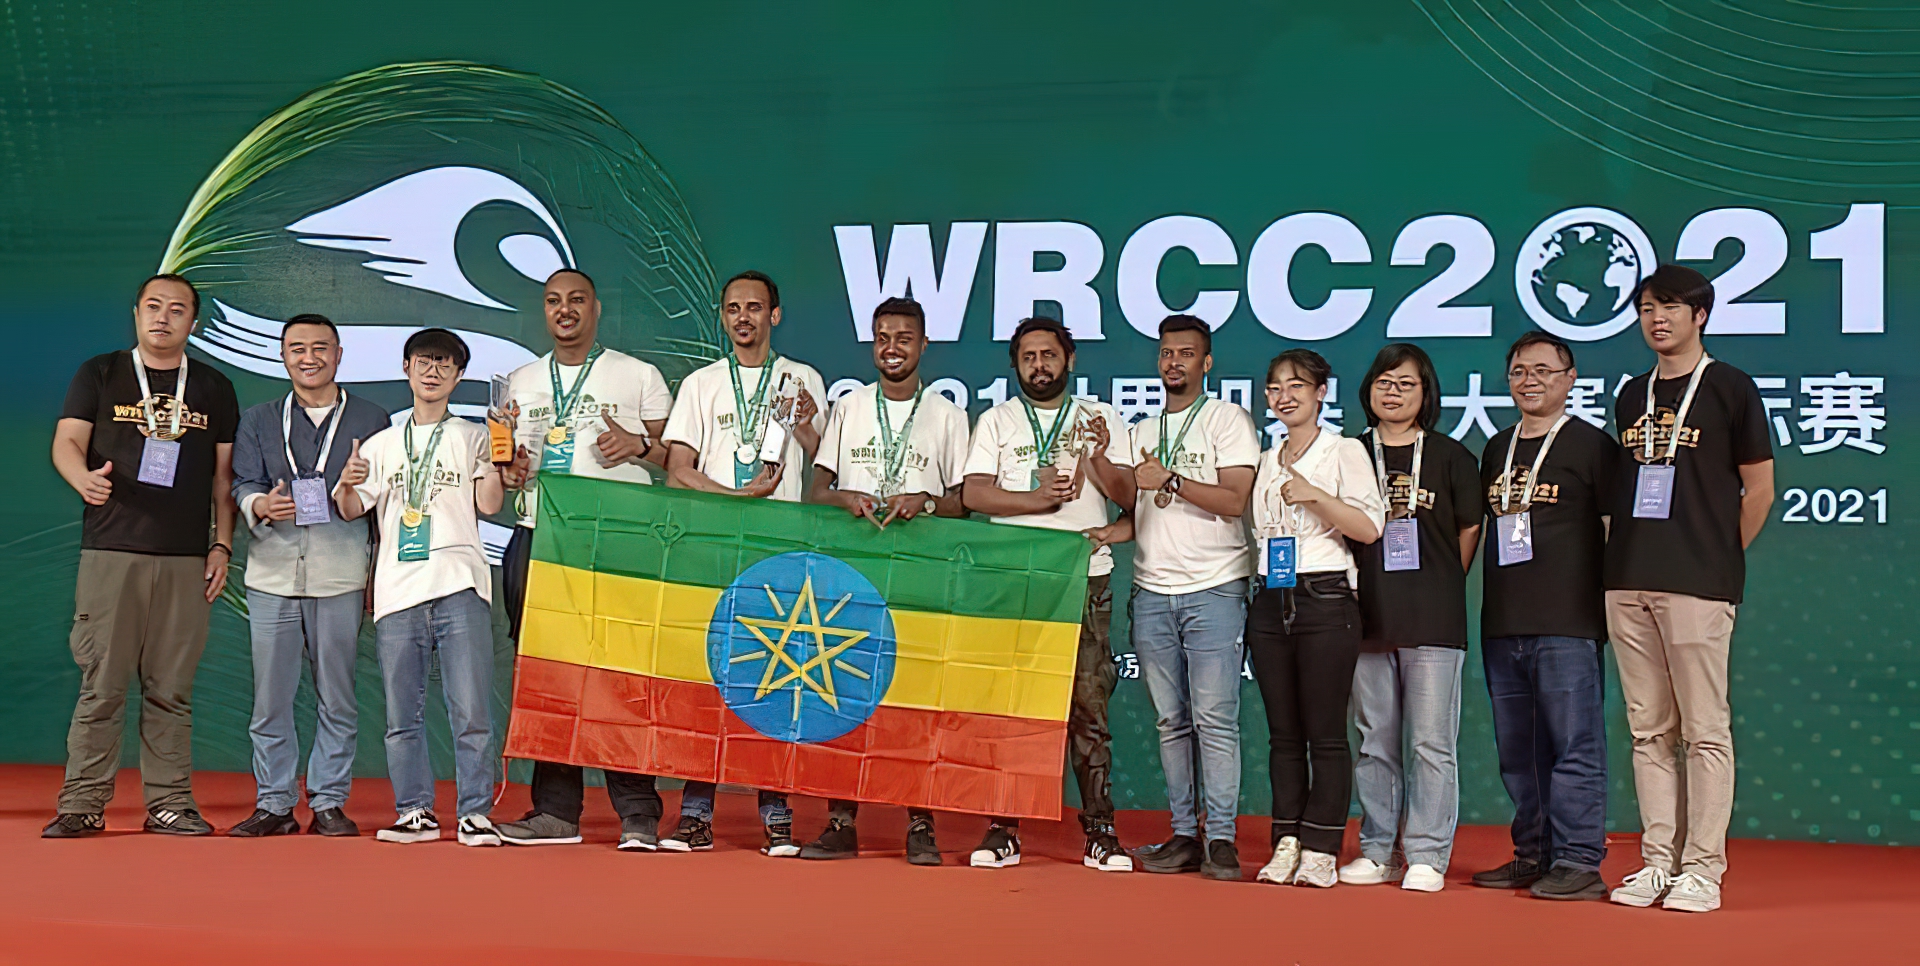 Ethiopian win Medals at the Beijing international robot competition